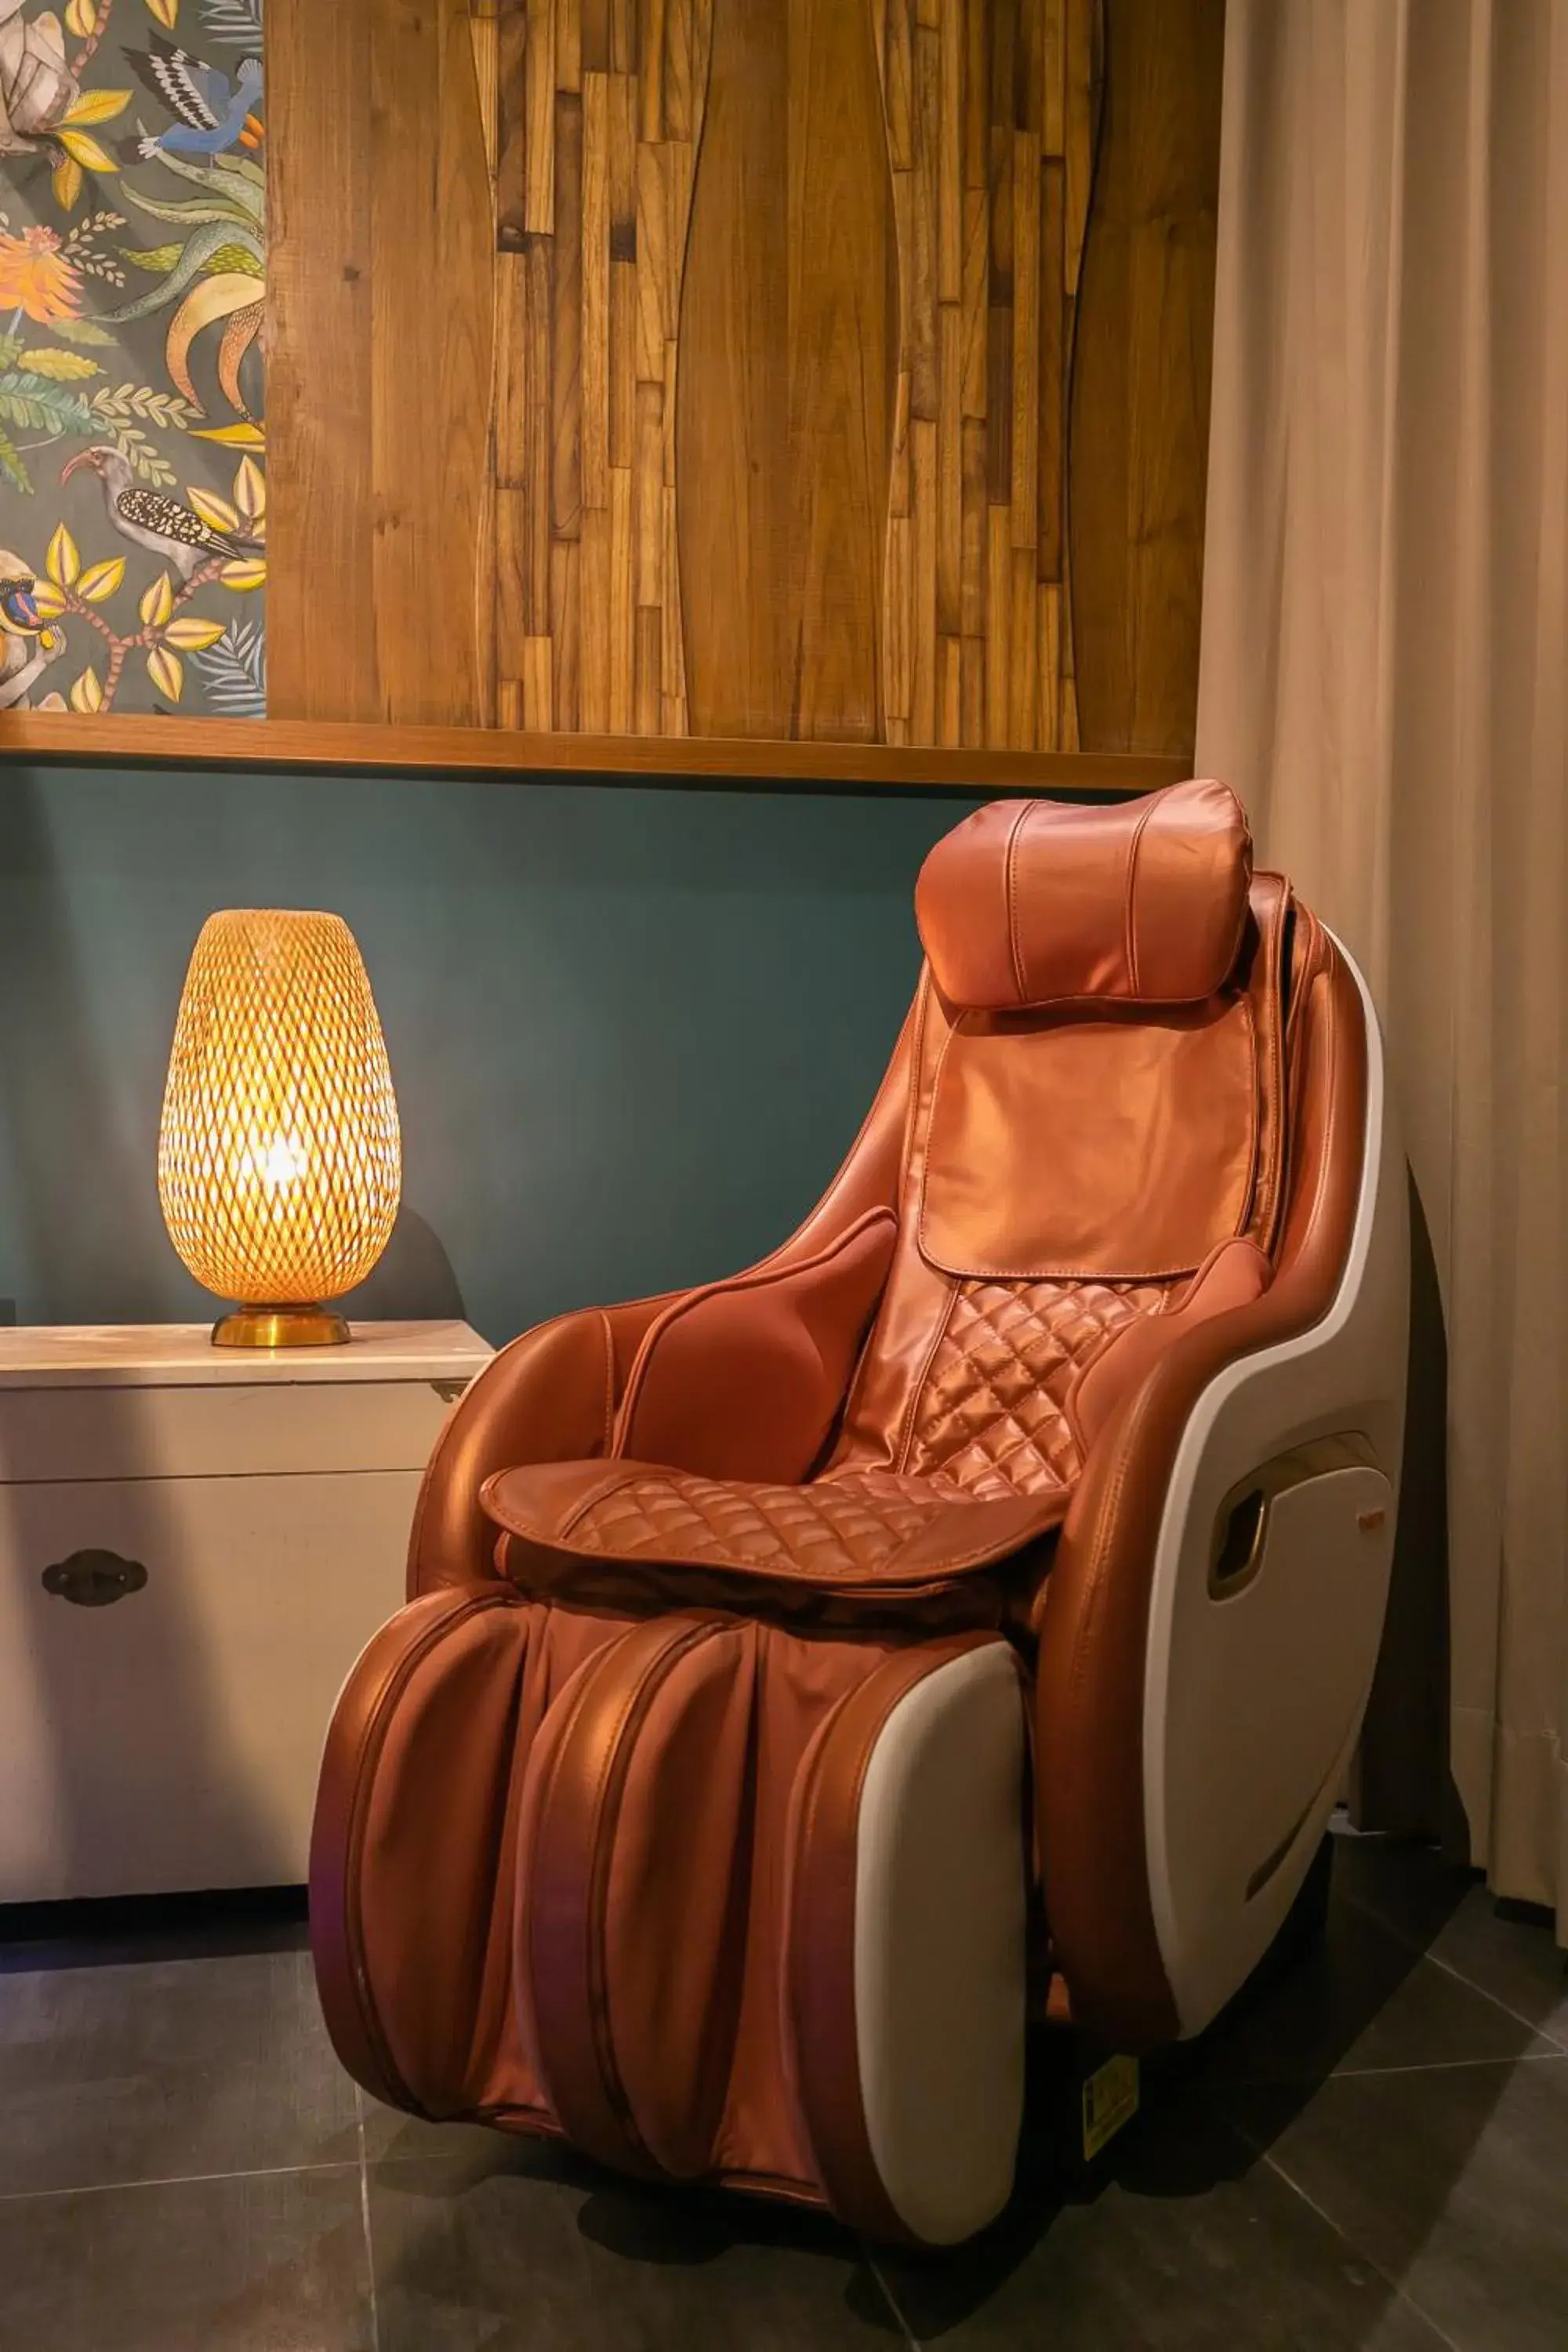 Massage, Seating Area in Vogue Boutigue Motel